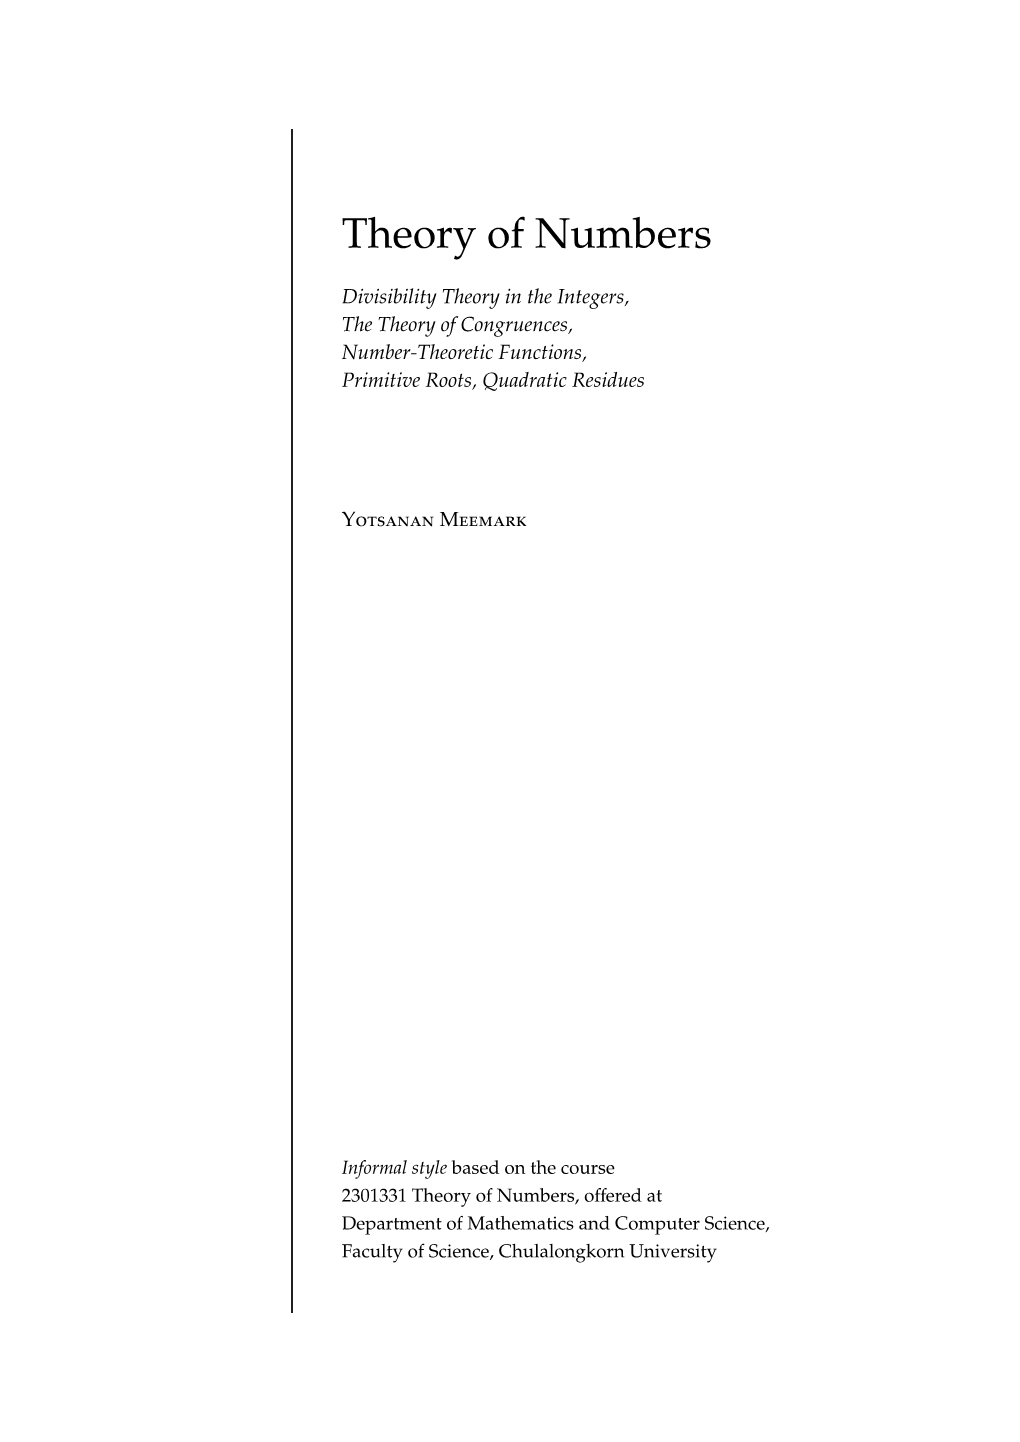 Number Theory, Dover Publications, Inc., New York, 1994